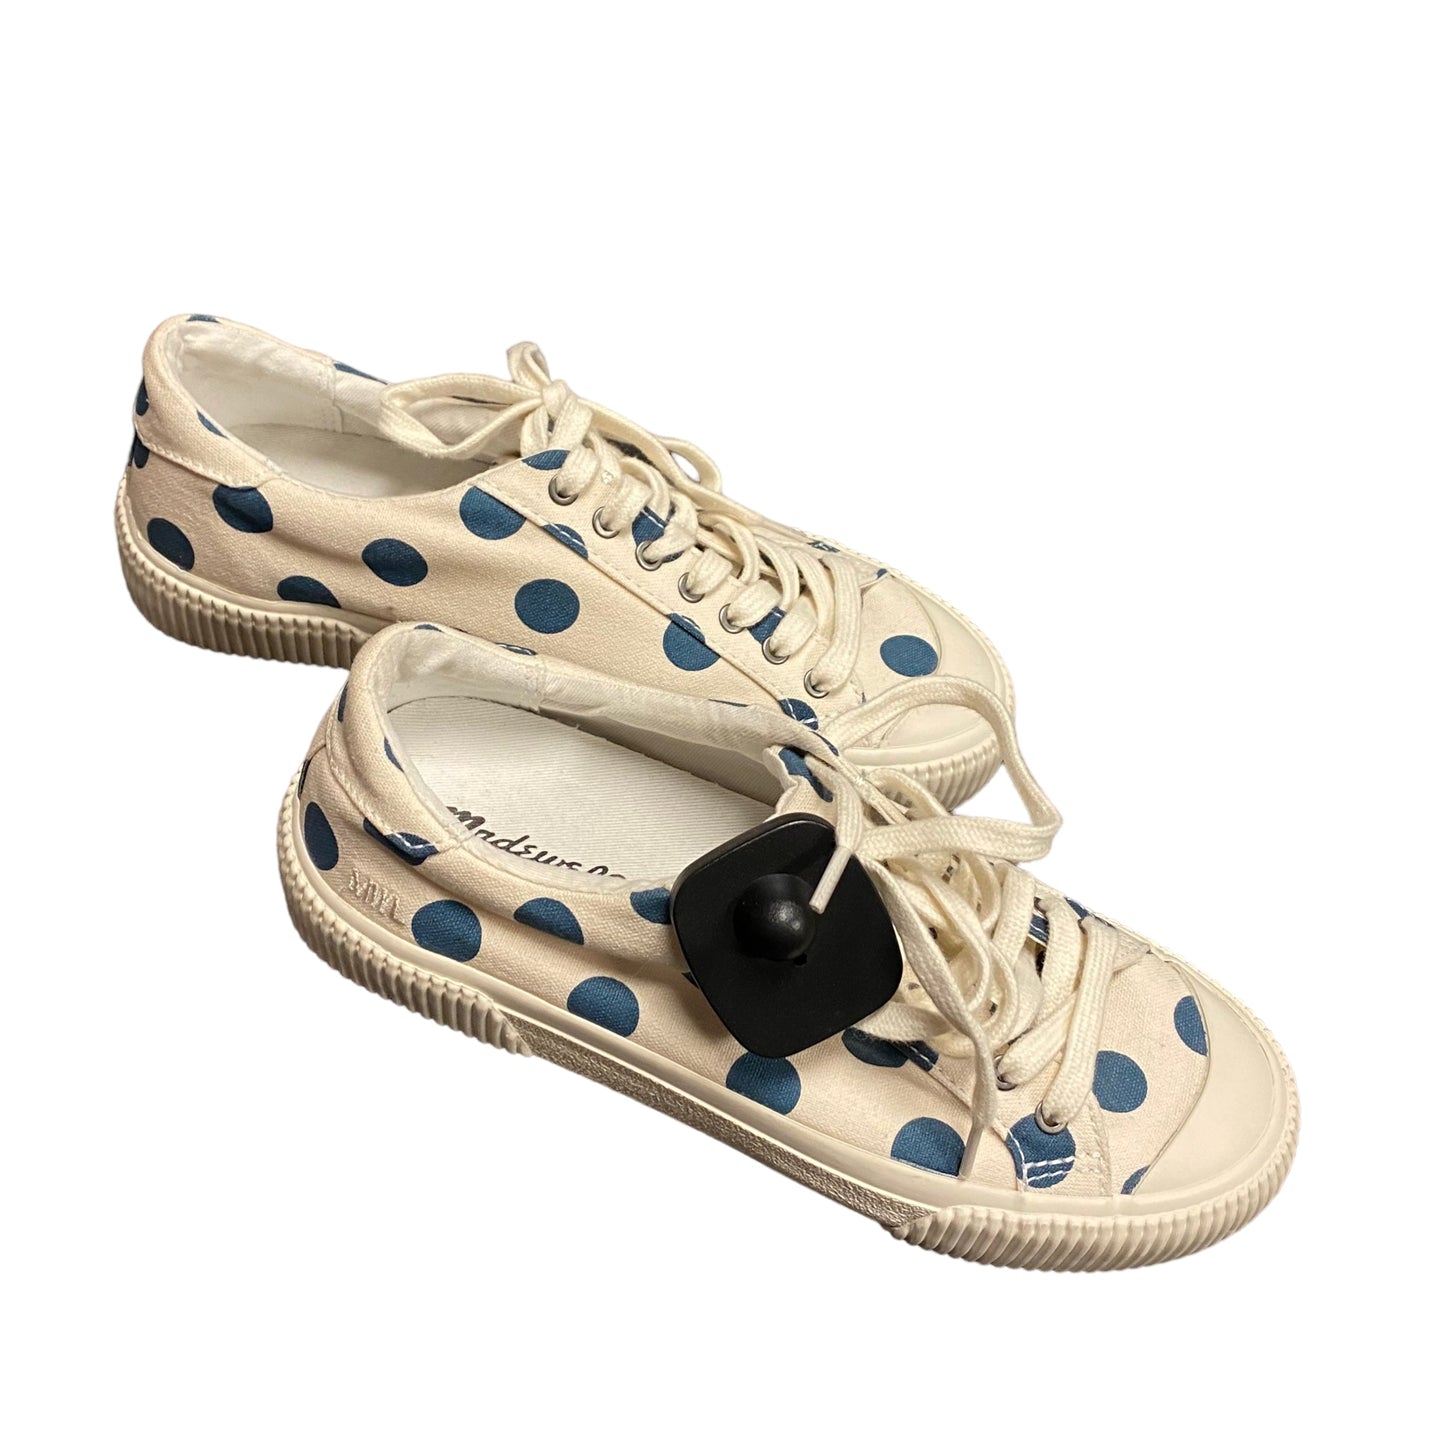 Polkadot Pattern Shoes Athletic Madewell, Size 5